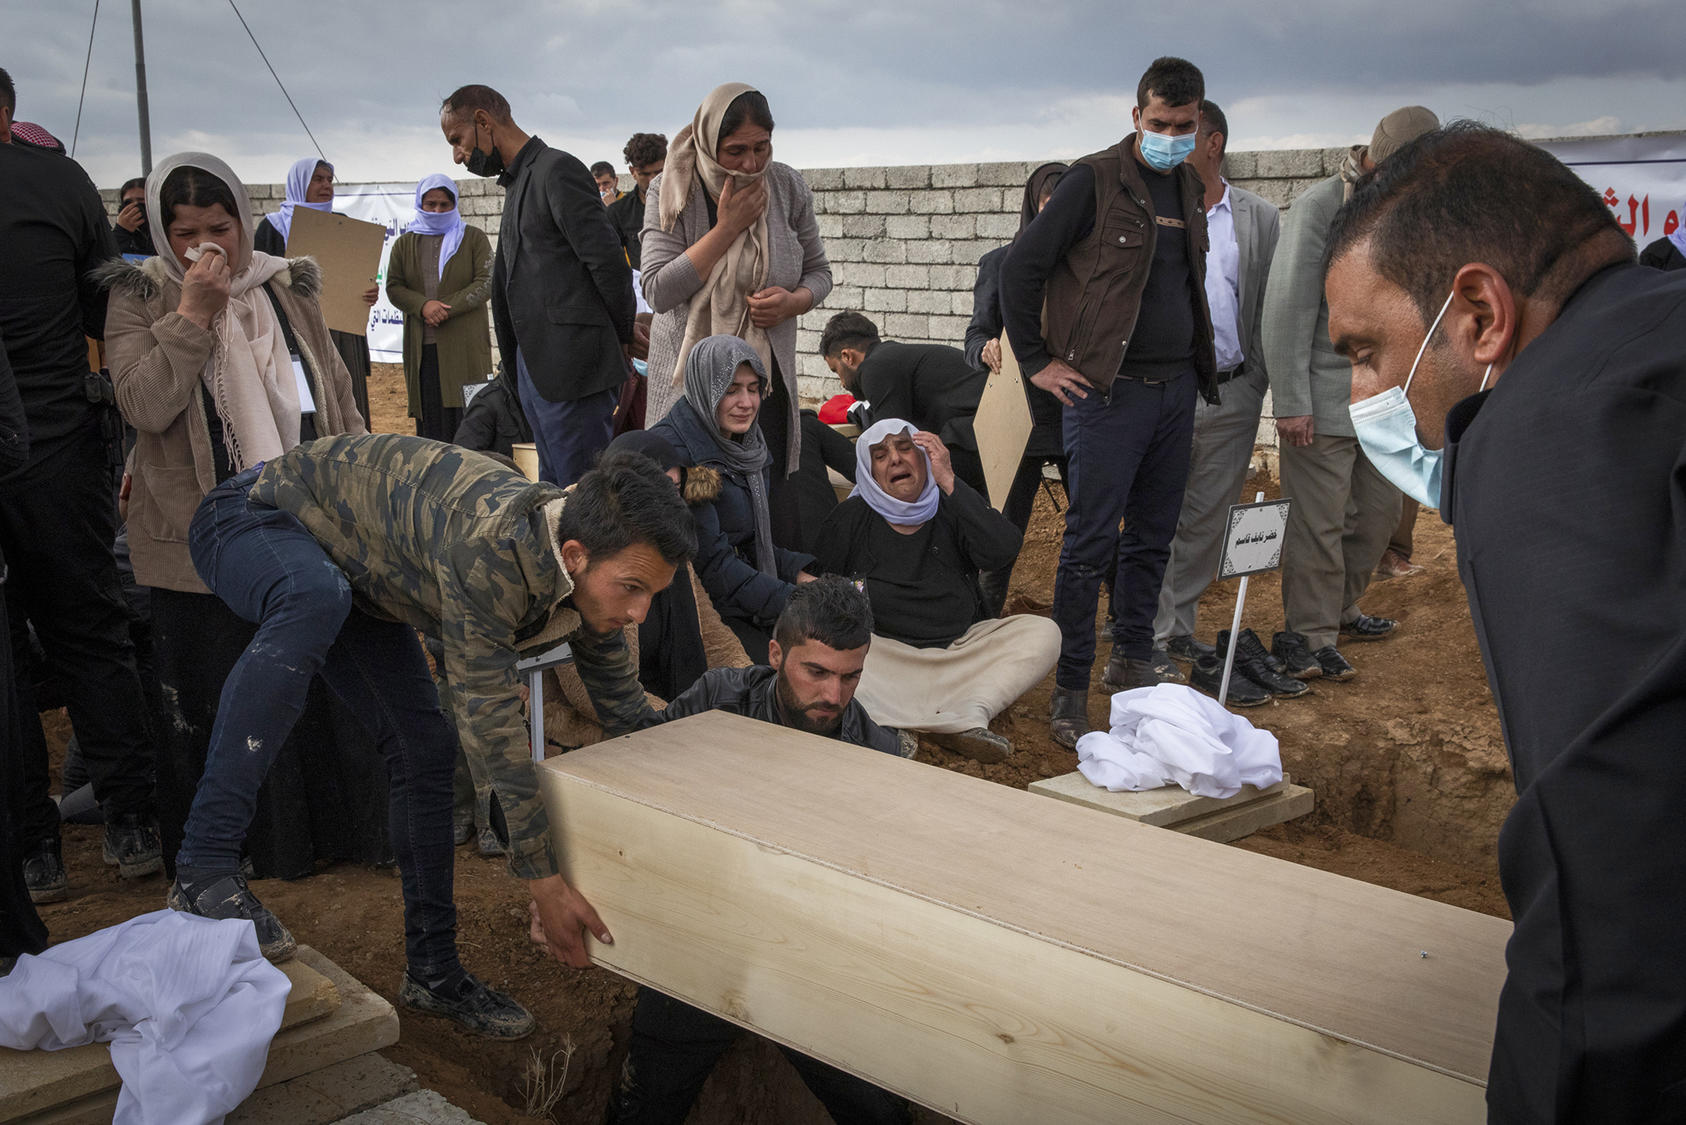 Yazidis in Kojo, Iraq, bury one of 103 men from the village killed by ISIS fighters and dumped in a mass grave in 2014. Thousands of Yazidi women and children, whom ISIS seized as slaves, remain missing. (Ivor Prickett/The New York Times)